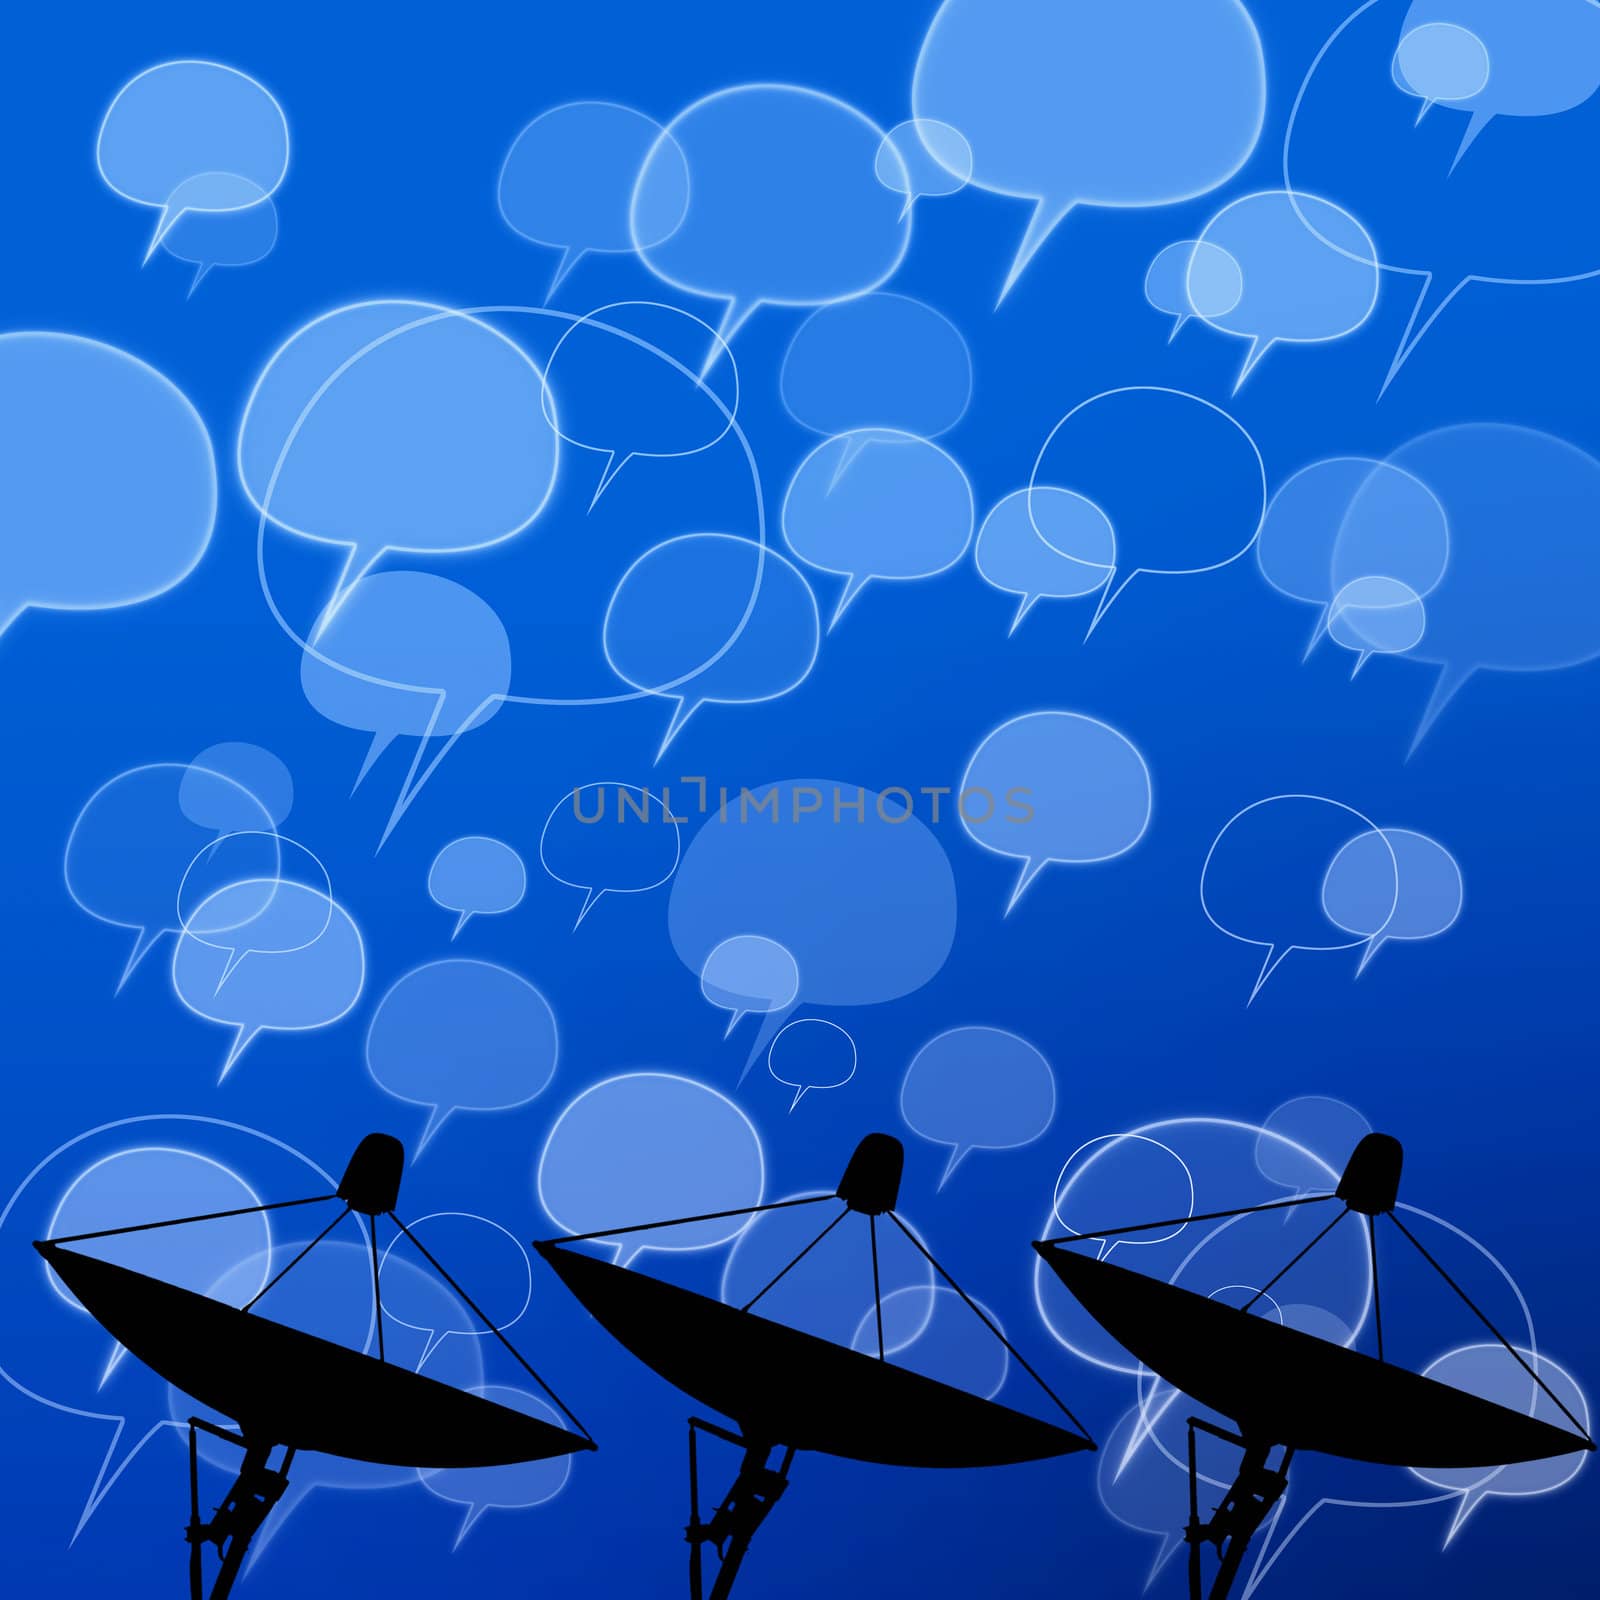 Satellite dish with comment icon on abstract background 